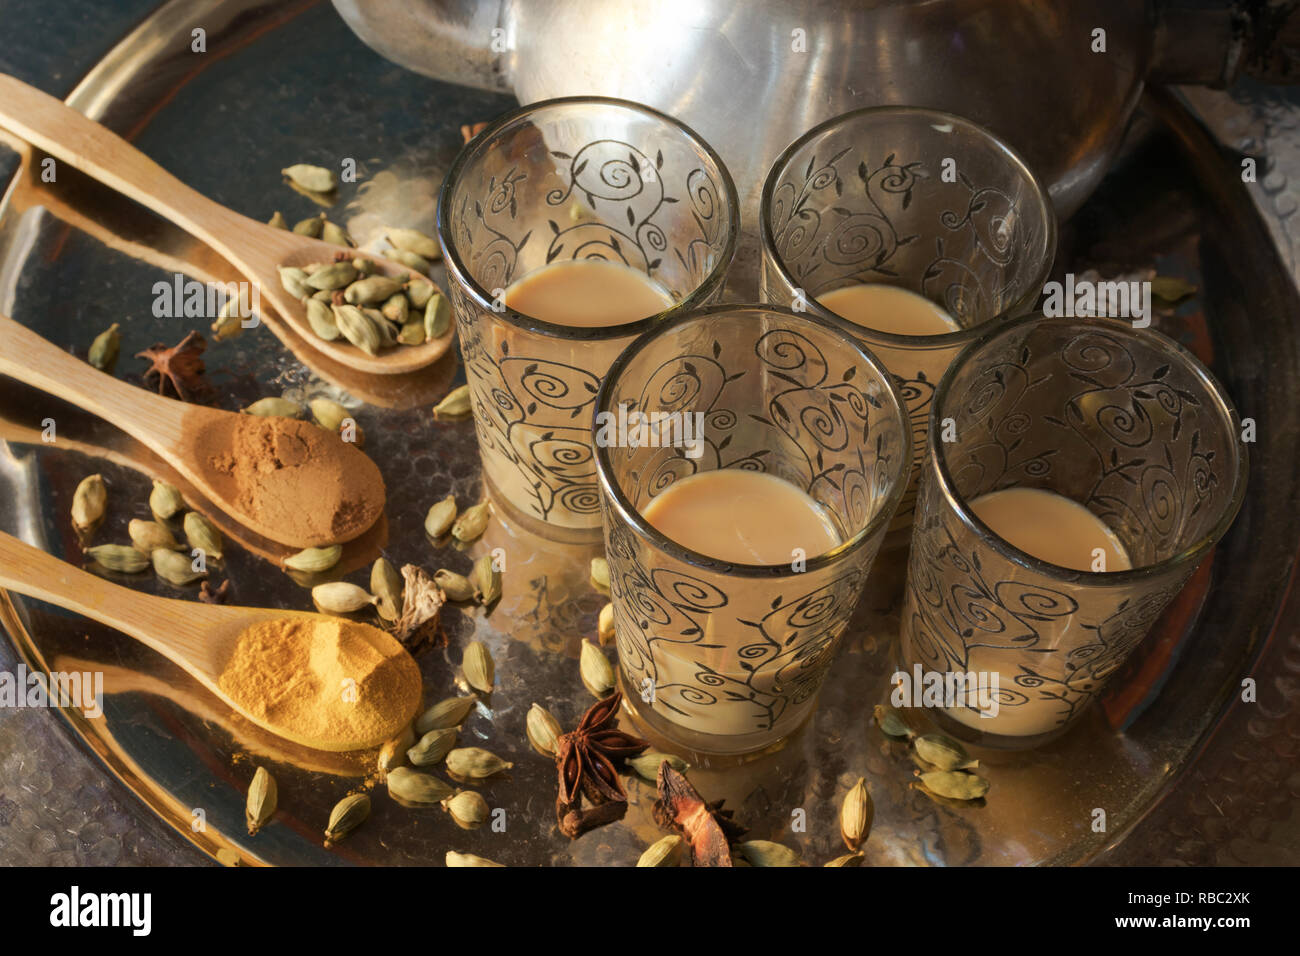 glass cups of pakistani tea with spices on a tray seen from above Stock Photo